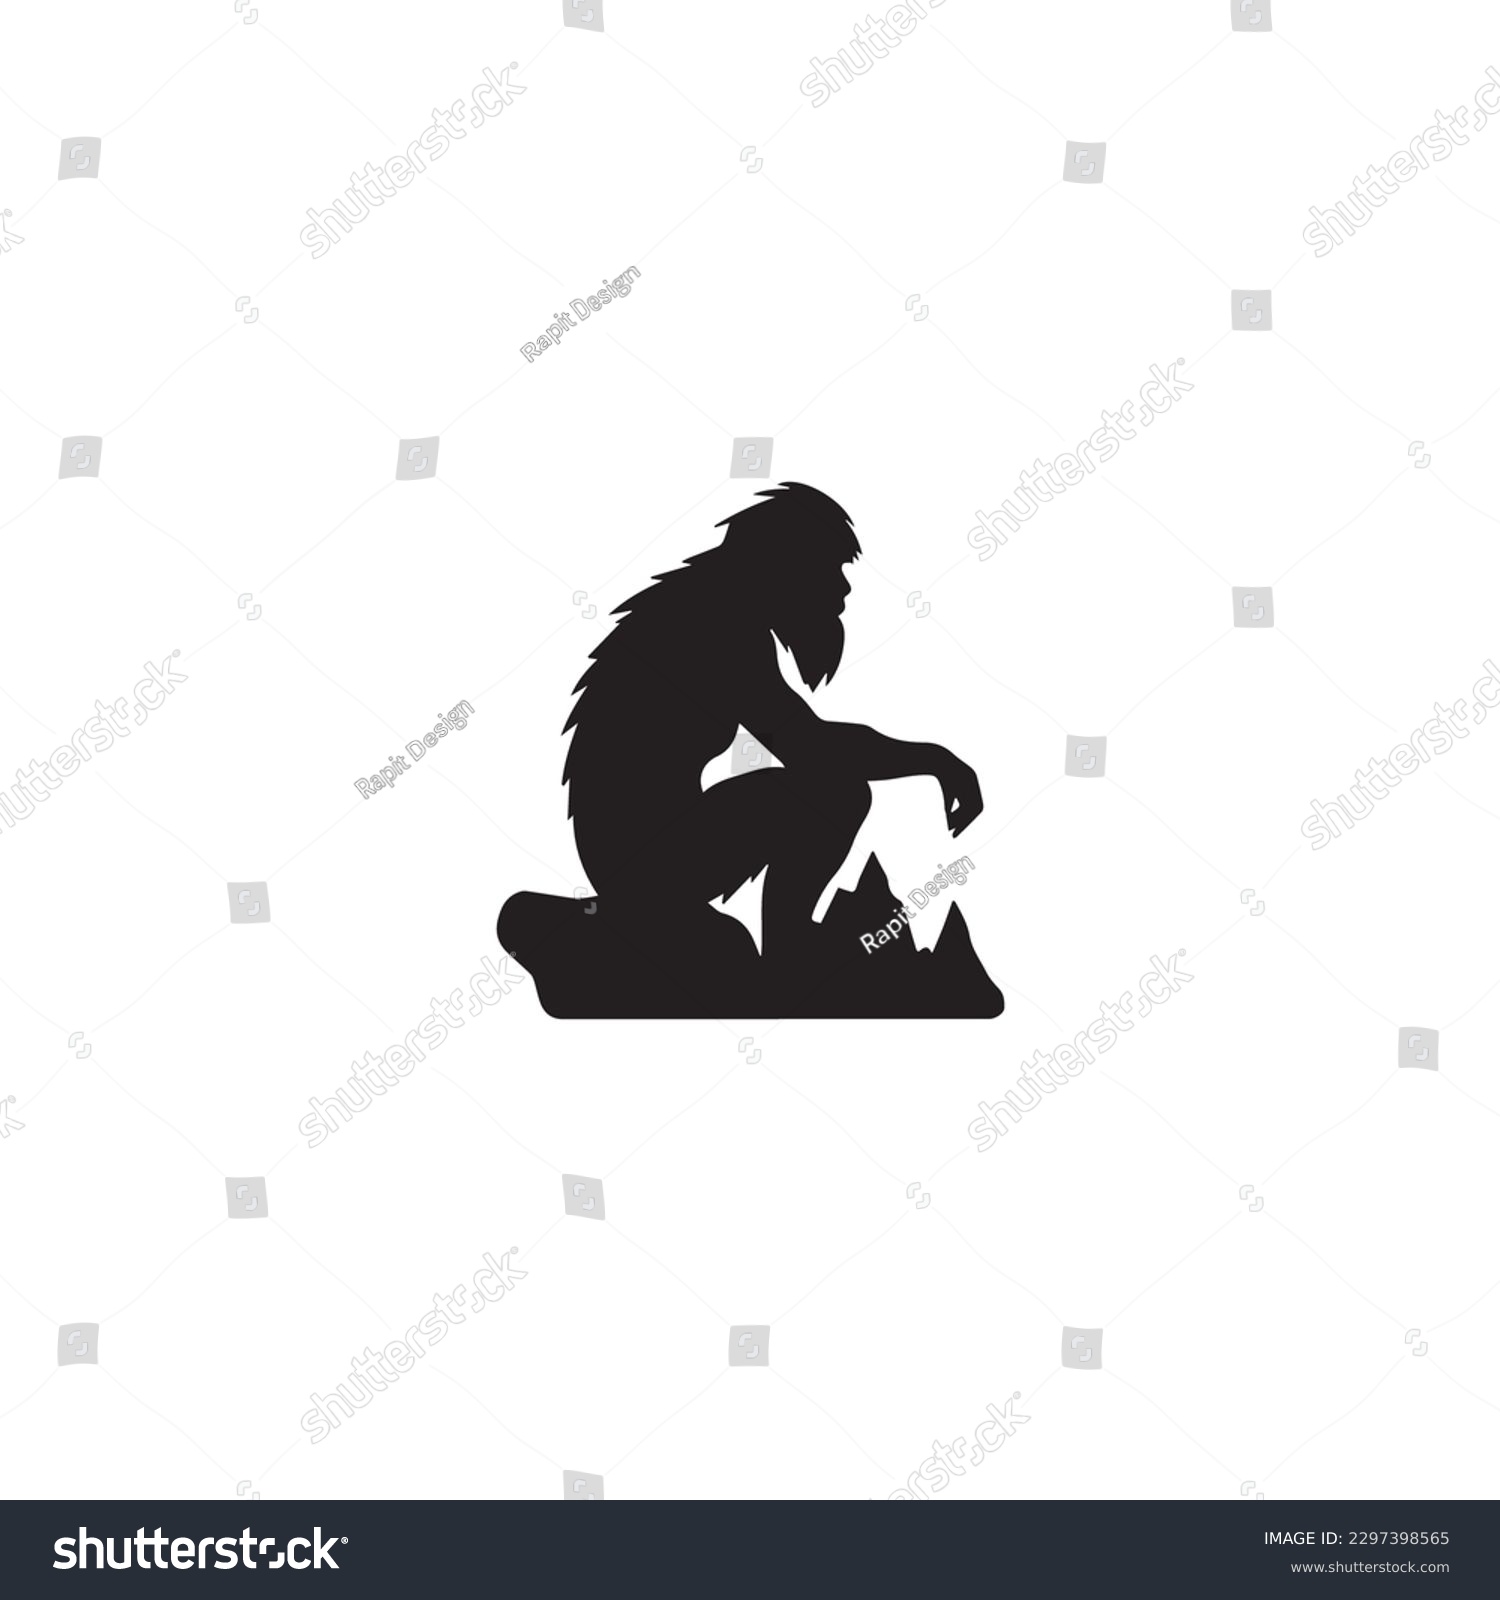 SVG of primitive caveman logo, an extinct species of archaic humans viewed from side svg